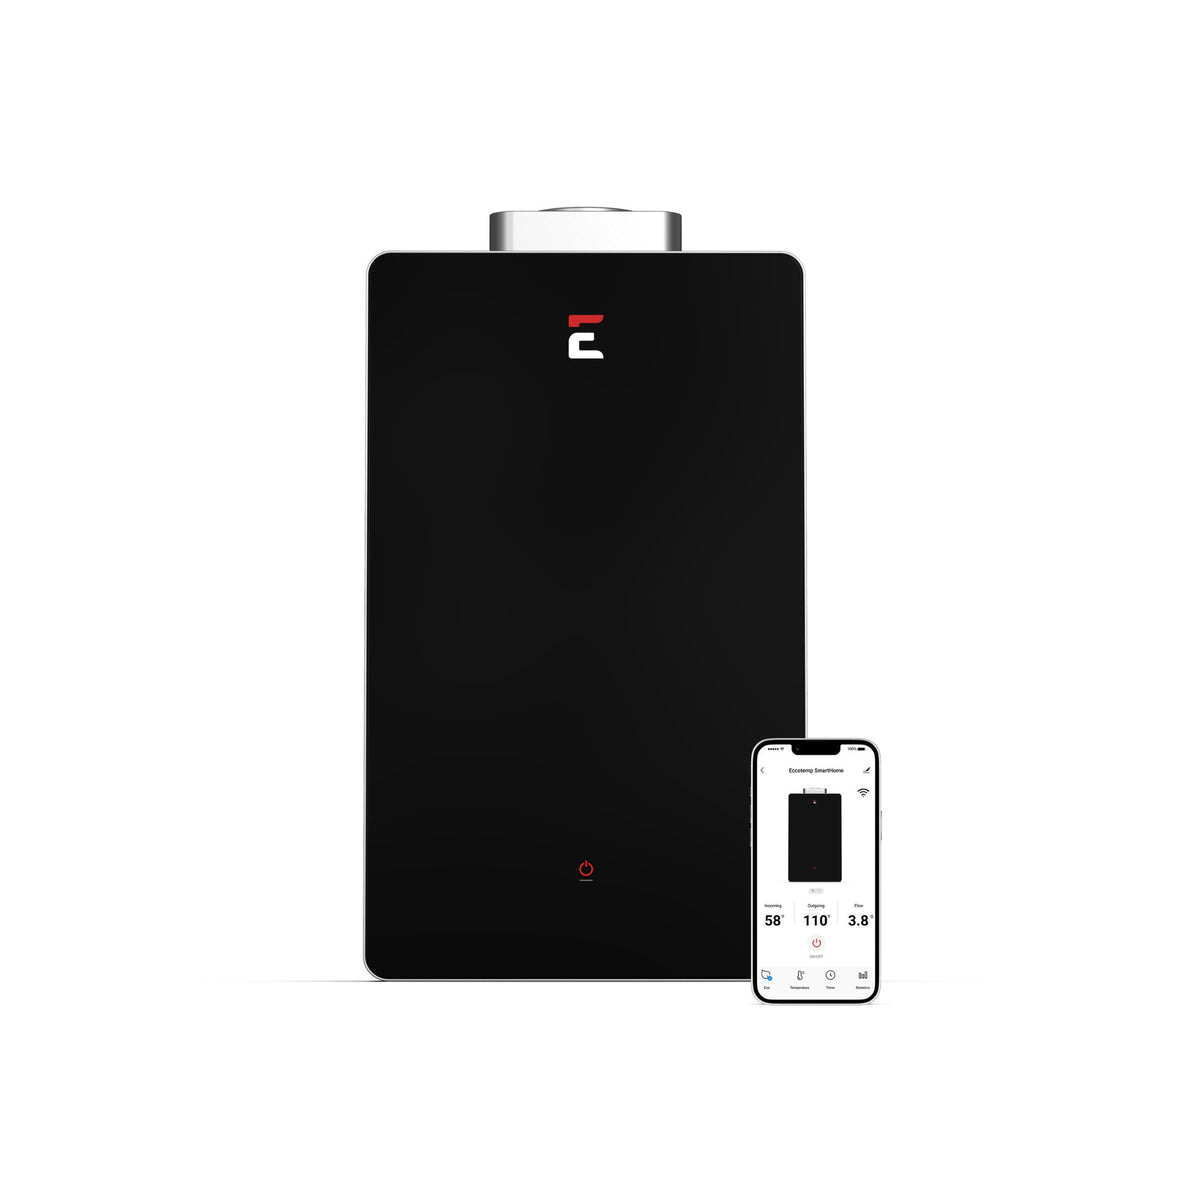 Eccotemp Smart Home 6.8 GPM Indoor Tankless Water Heater